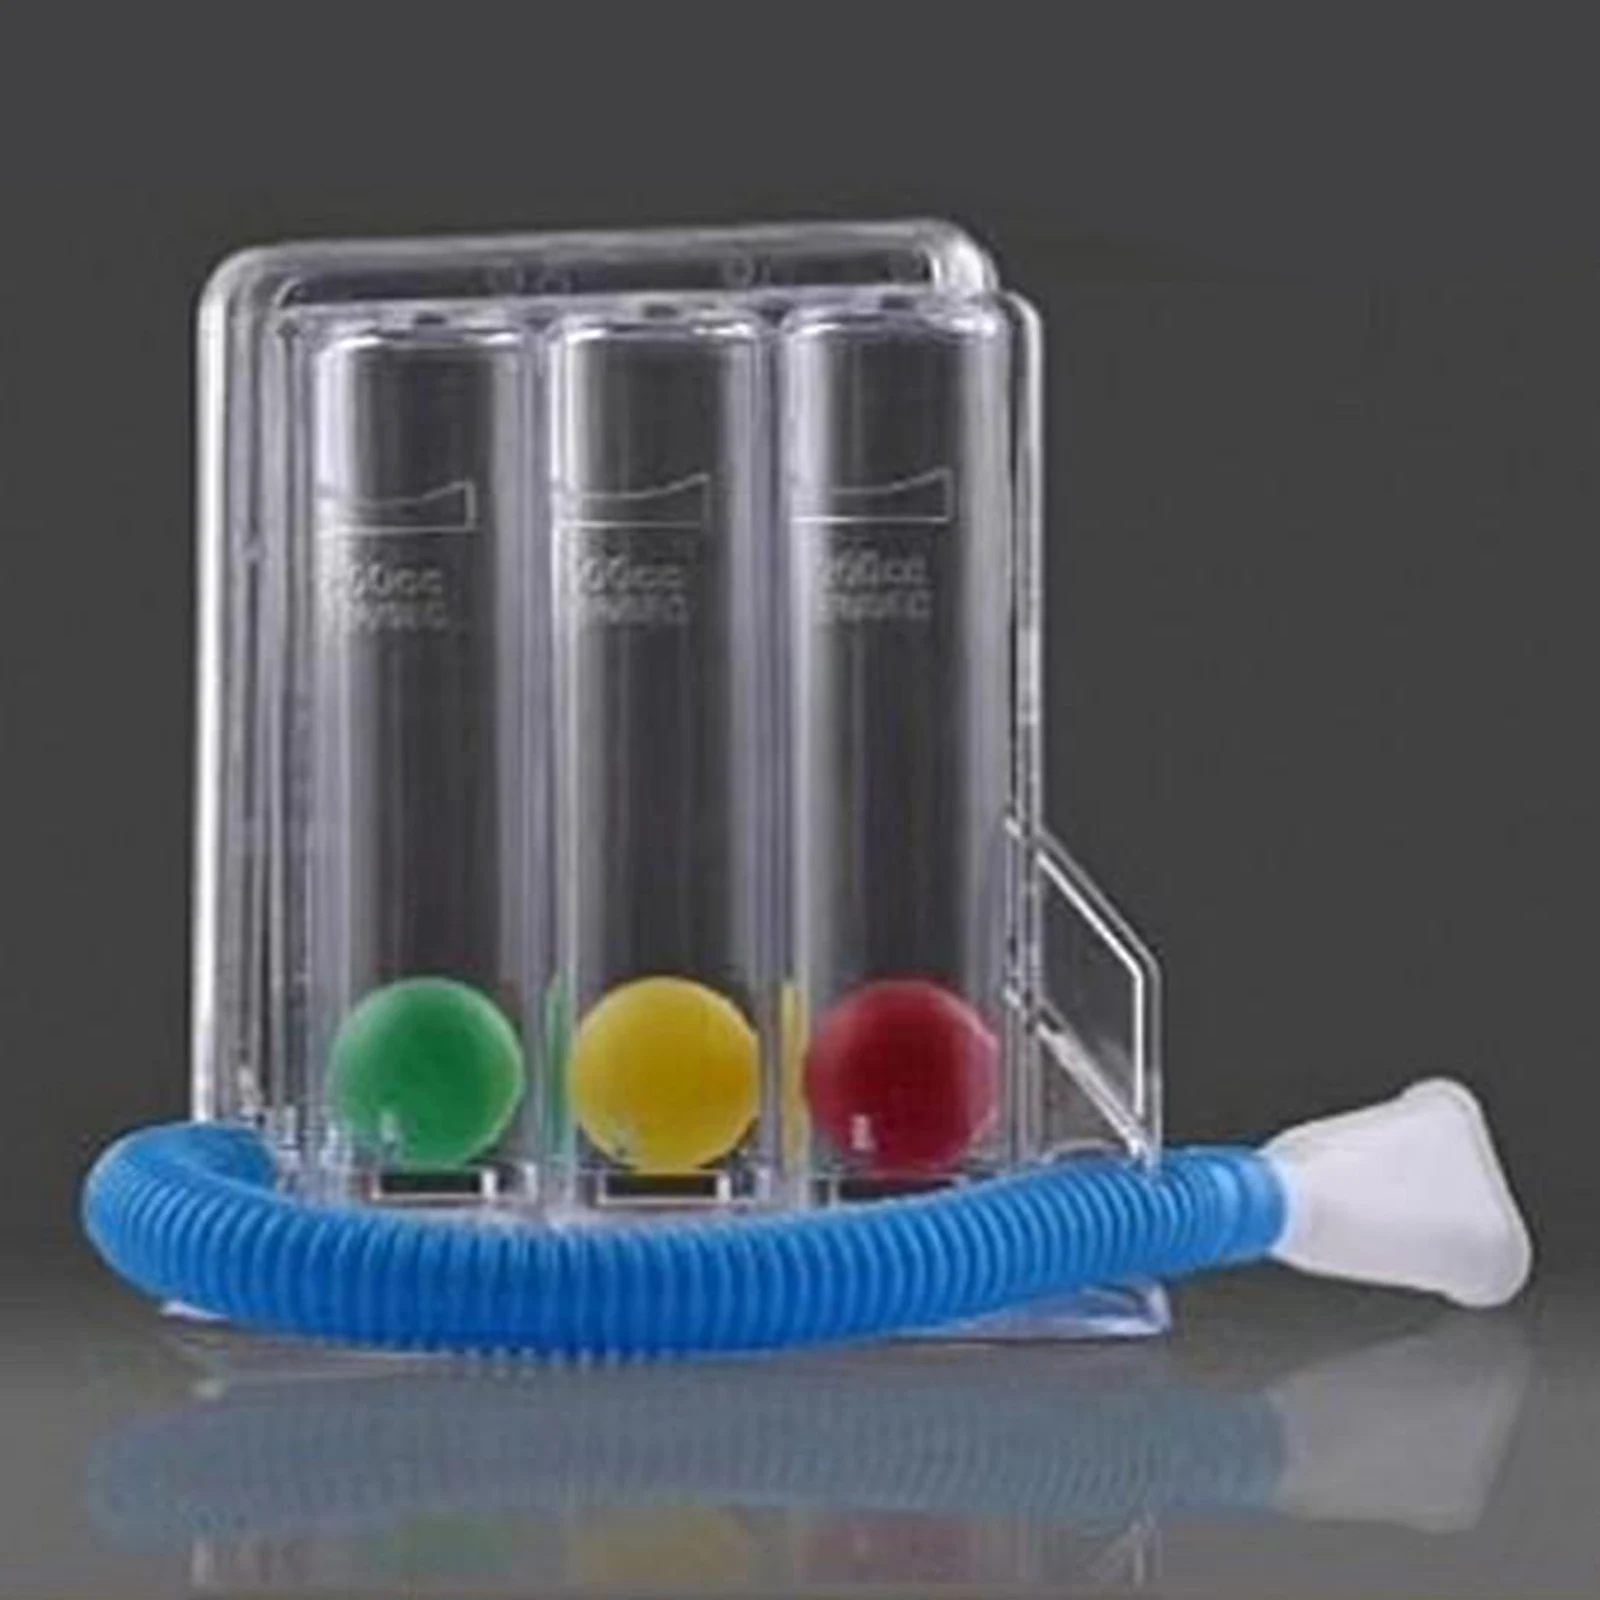 Three-ball Breathing Trainer Incentive Spirometer Lung Breathing Exerciser